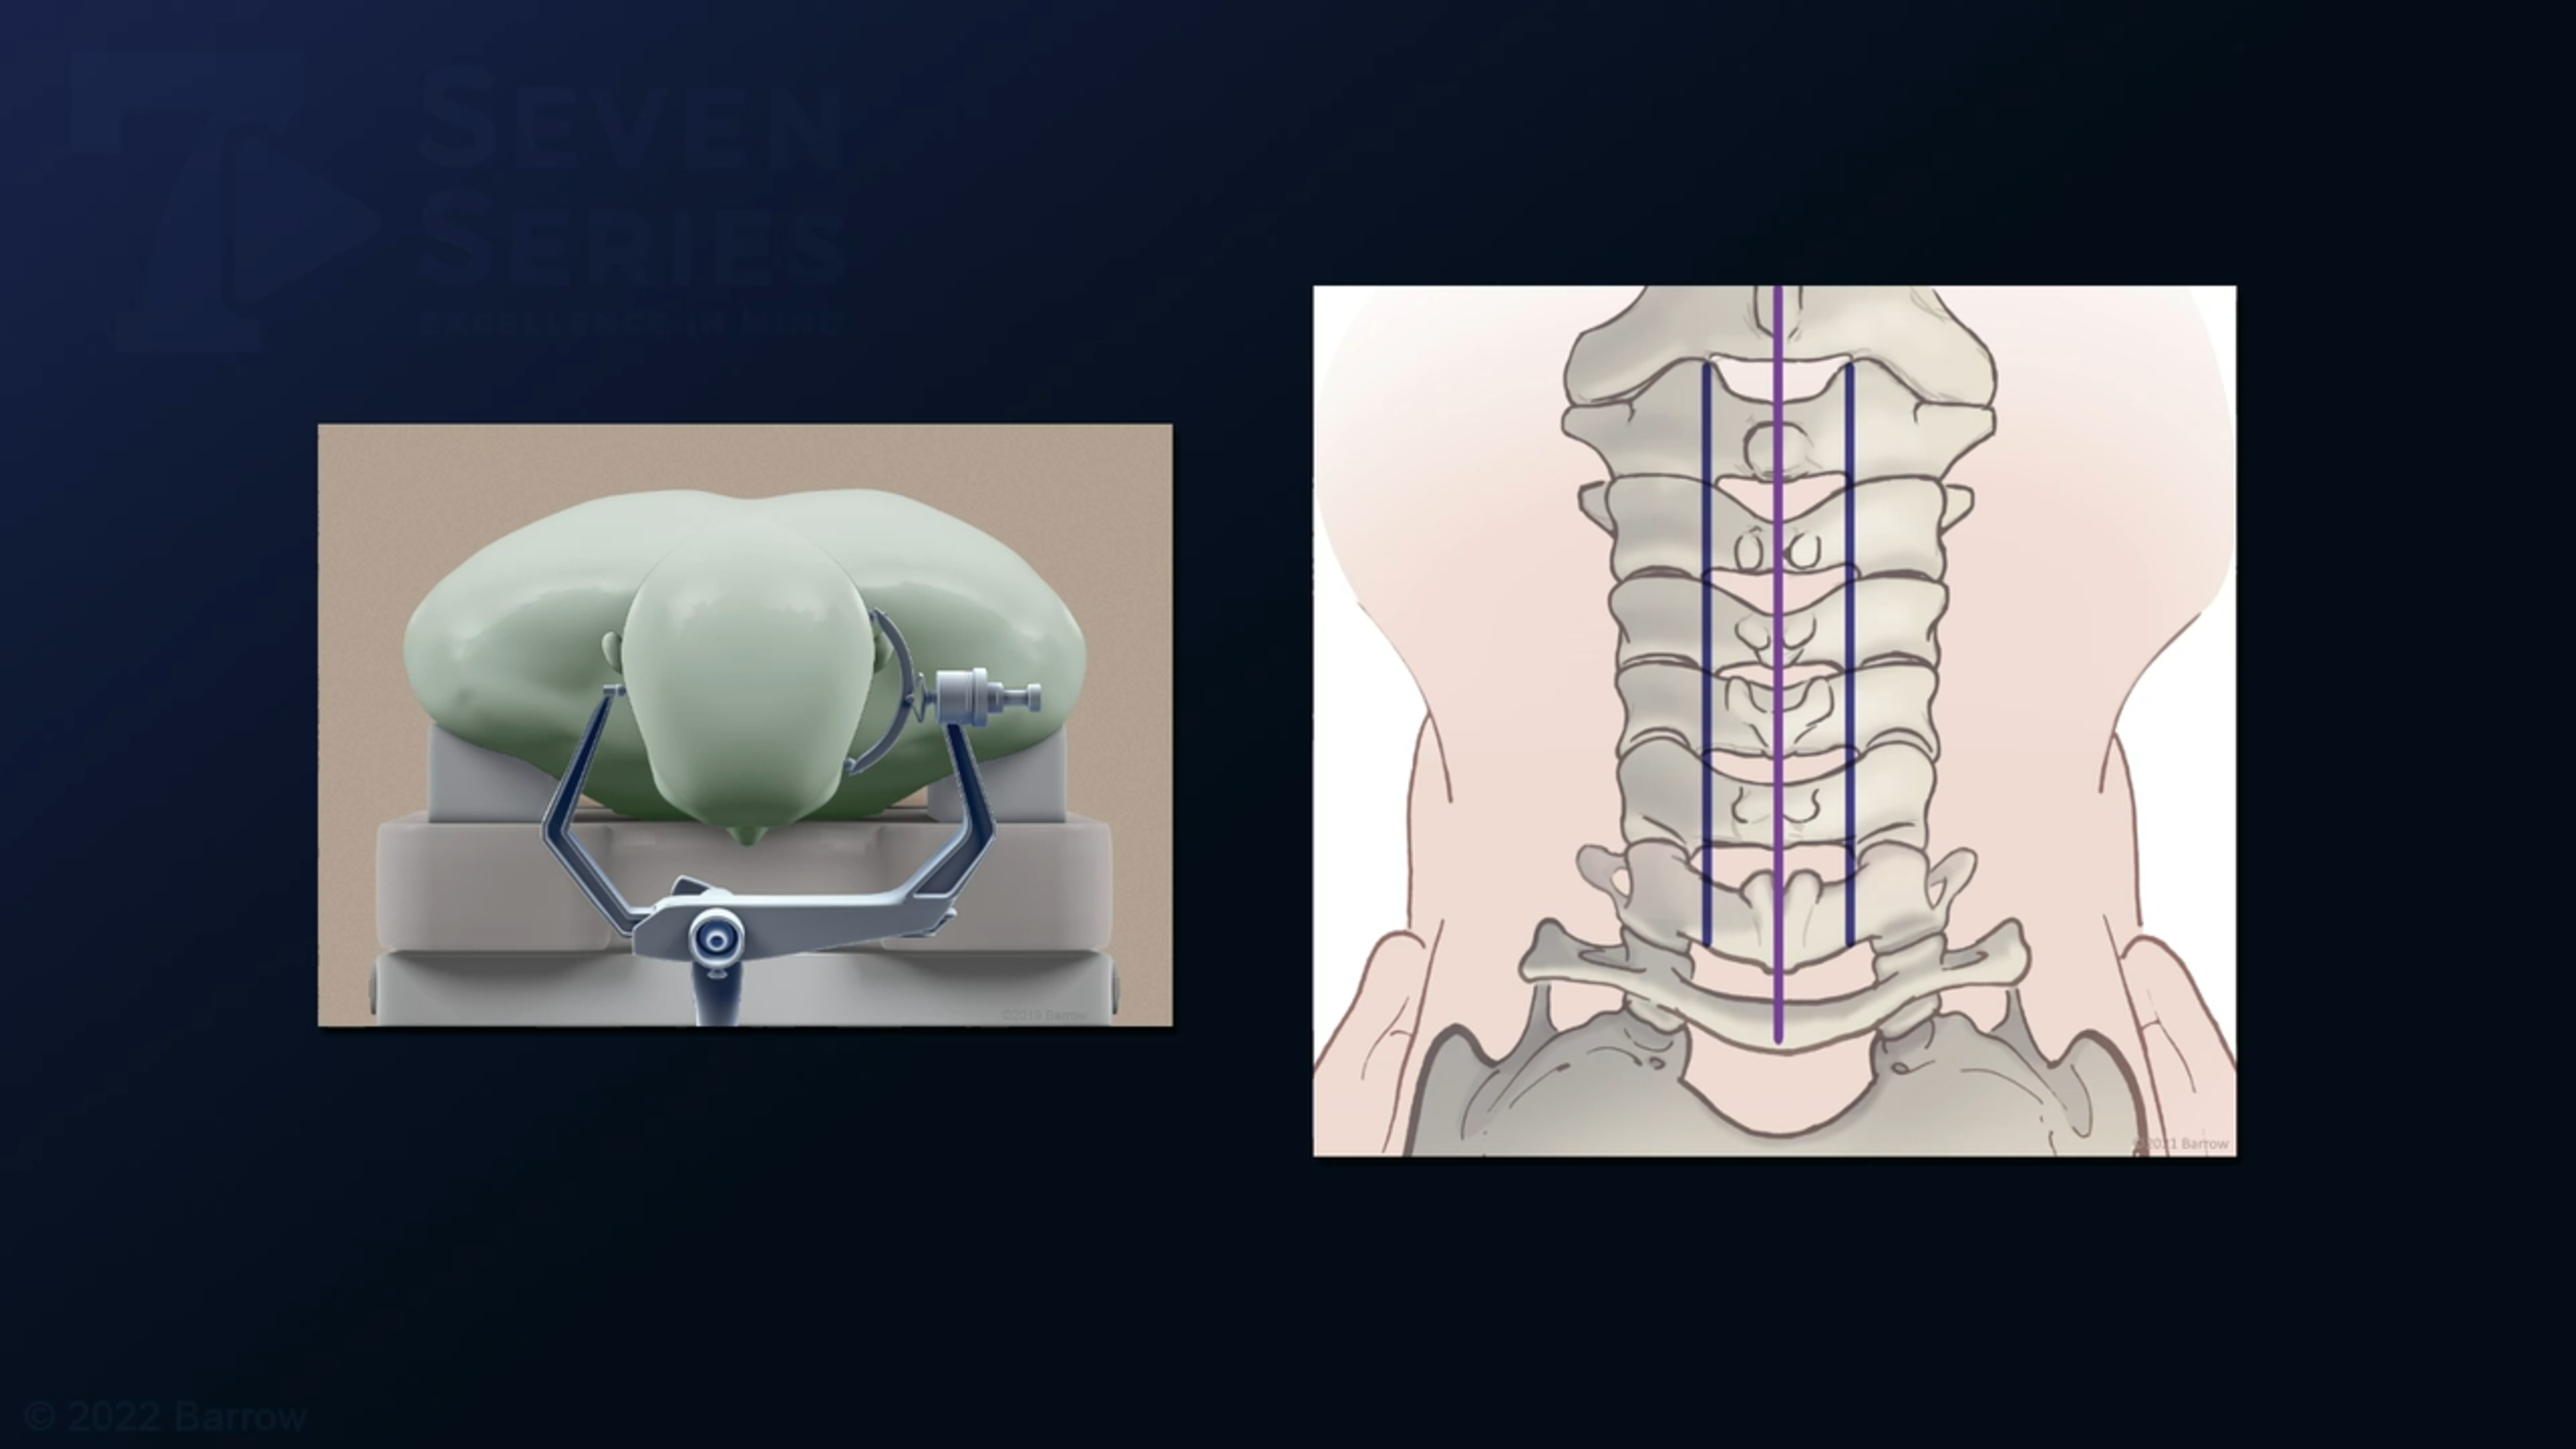 #178: Pial Resection Technique for an Eccentric Intramedullary Cervical Spinal Cord Arteriovenous Malformation